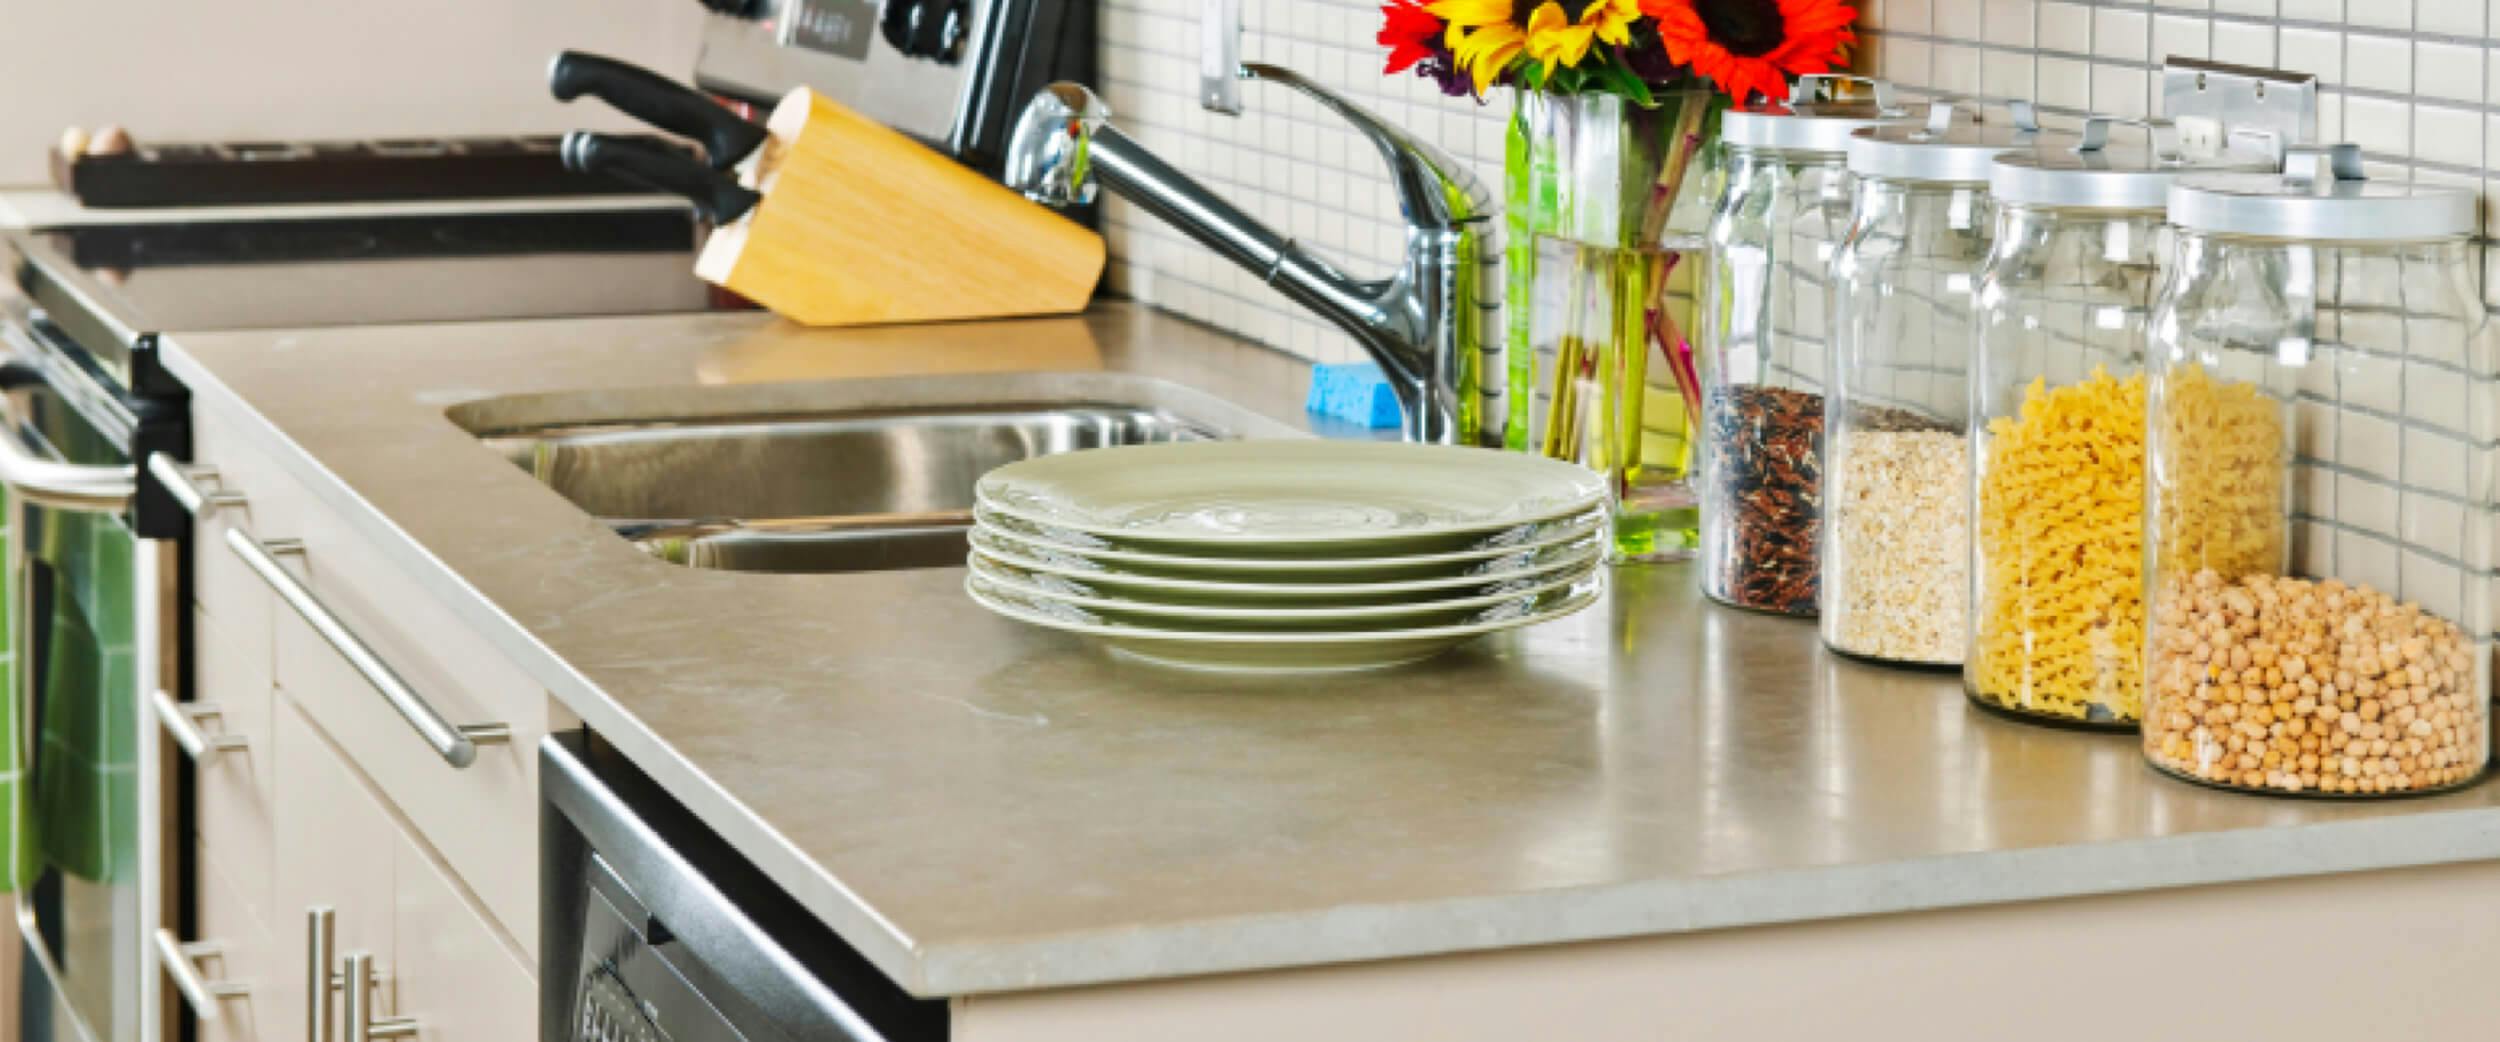 Pros And Cons Of Laminate Countertops In A Kitchen